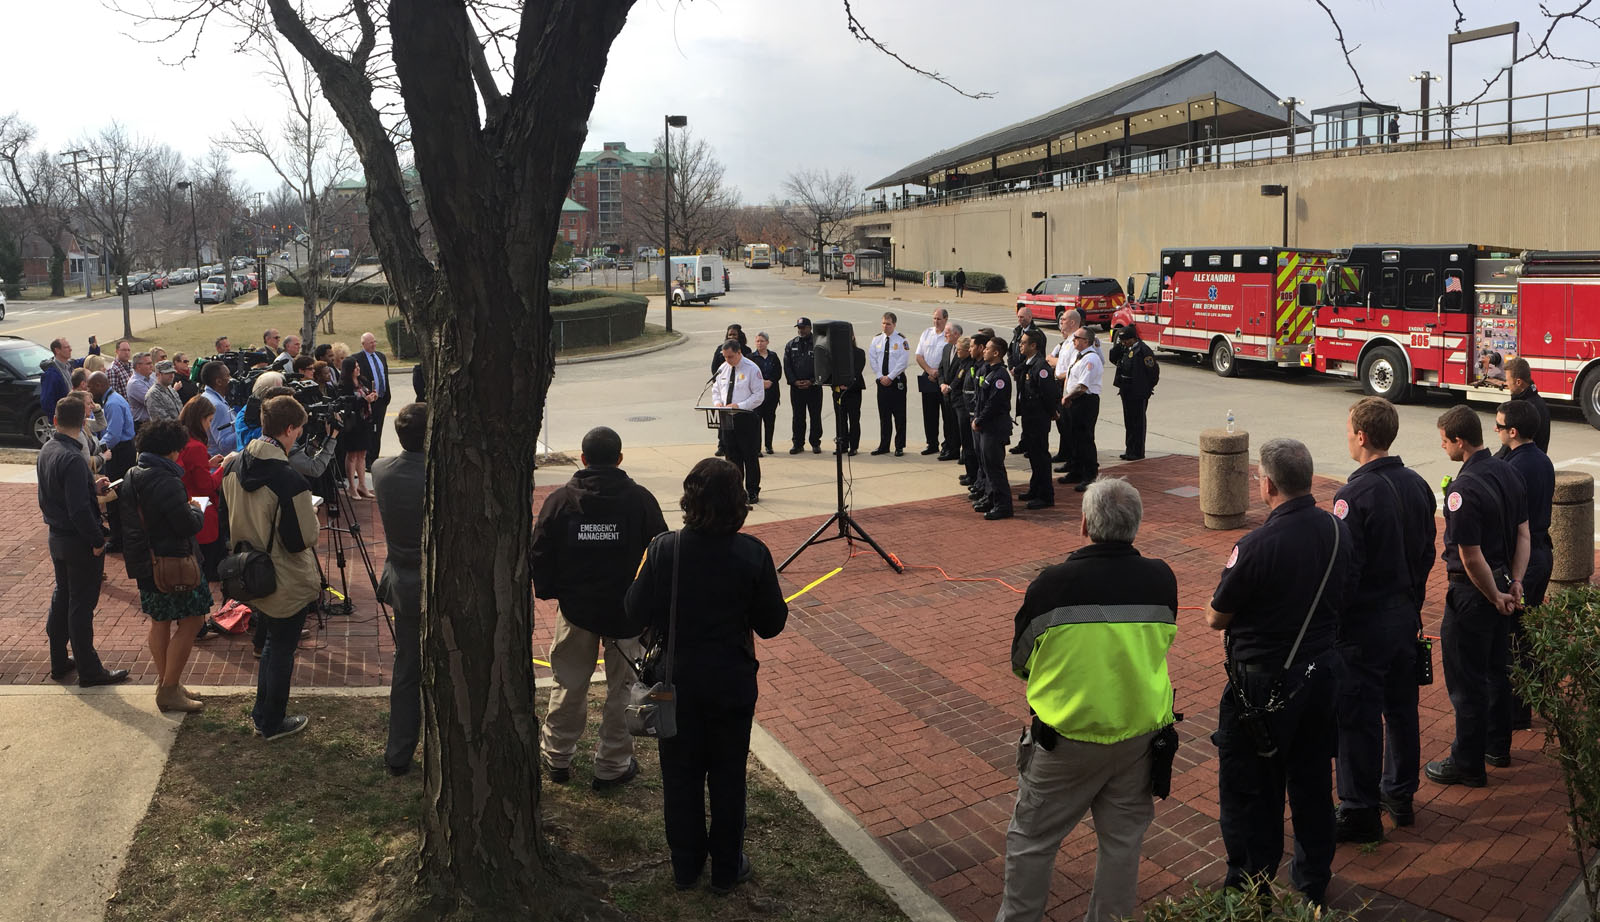 "All of these individuals worked together as a shining example of how to work together in a system to save lives," said Alexandria Fire Chief Robert C. Dubé at a news conference where Metro Transit Officer Leanne Dill and Debora Anderson, of Lorton, received commendations. Also pictured are some of the Alexandria firefighters and paramedics on hand that day. (WTOP/Kristi King)